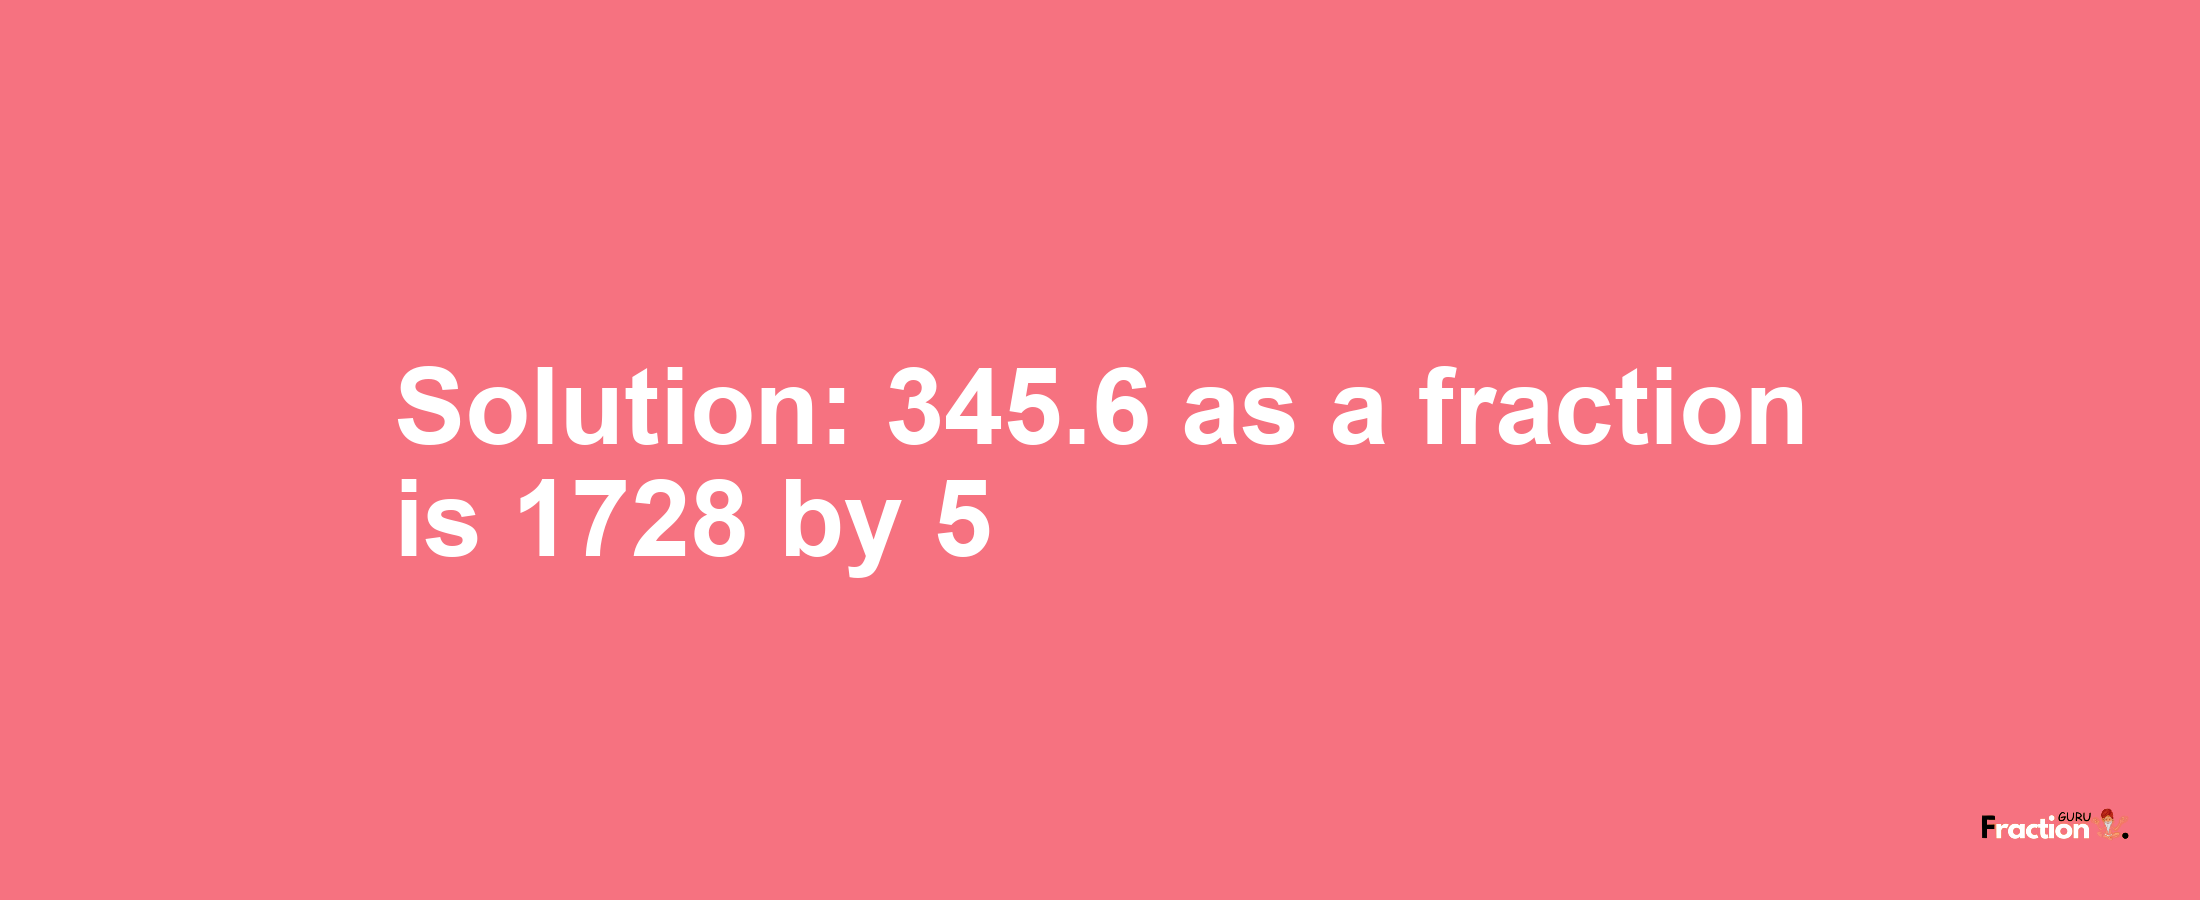 Solution:345.6 as a fraction is 1728/5